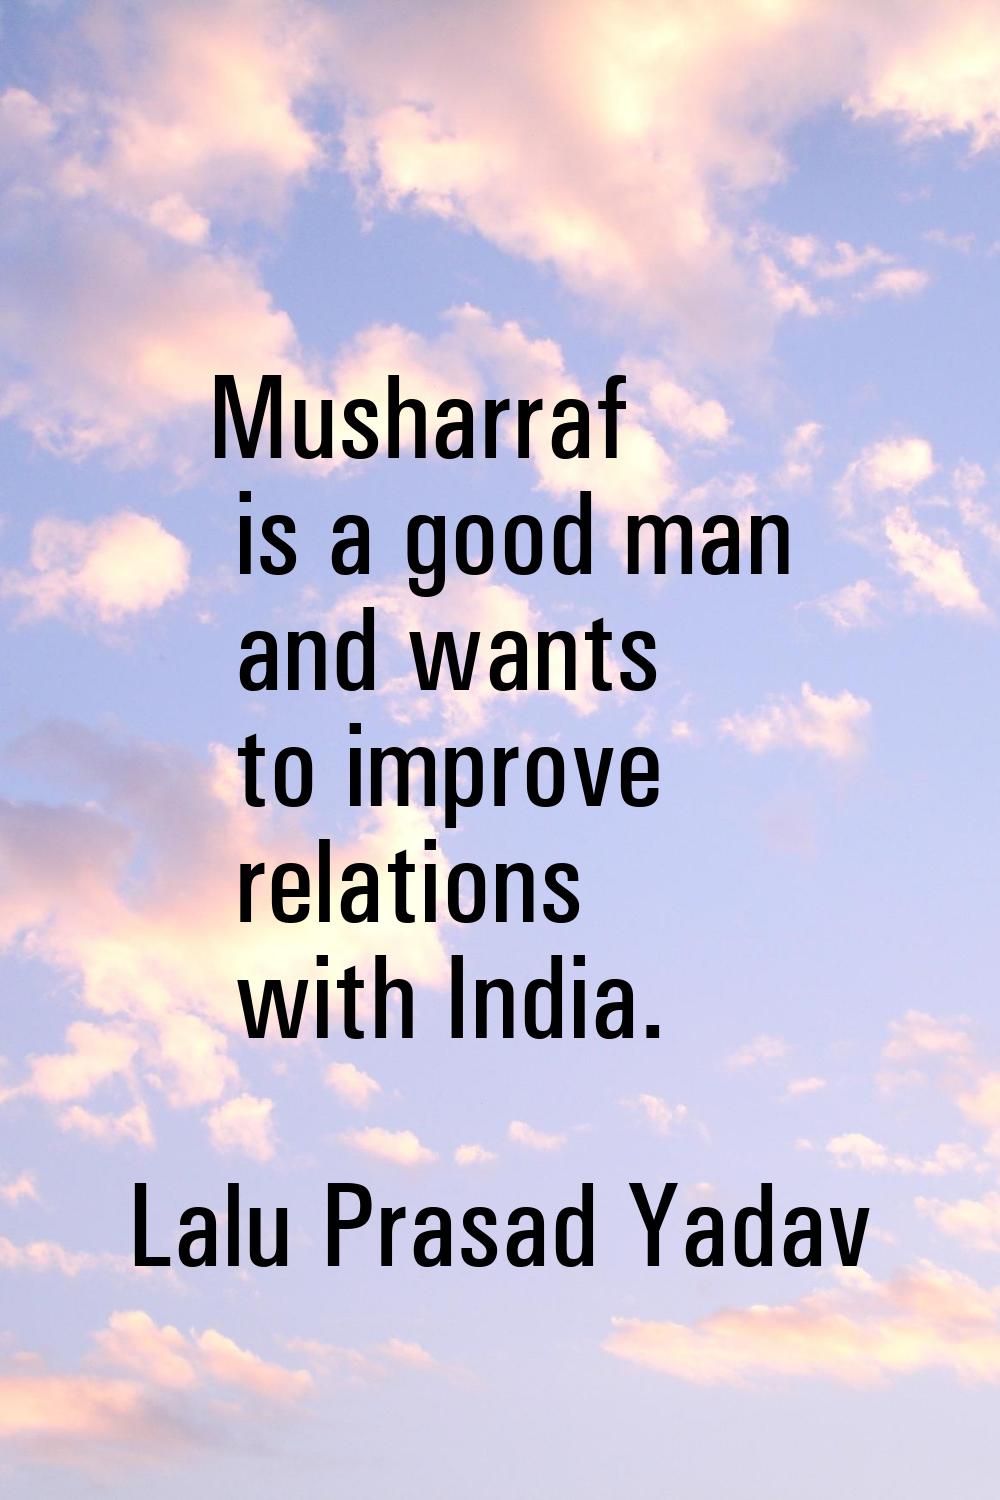 Musharraf is a good man and wants to improve relations with India.